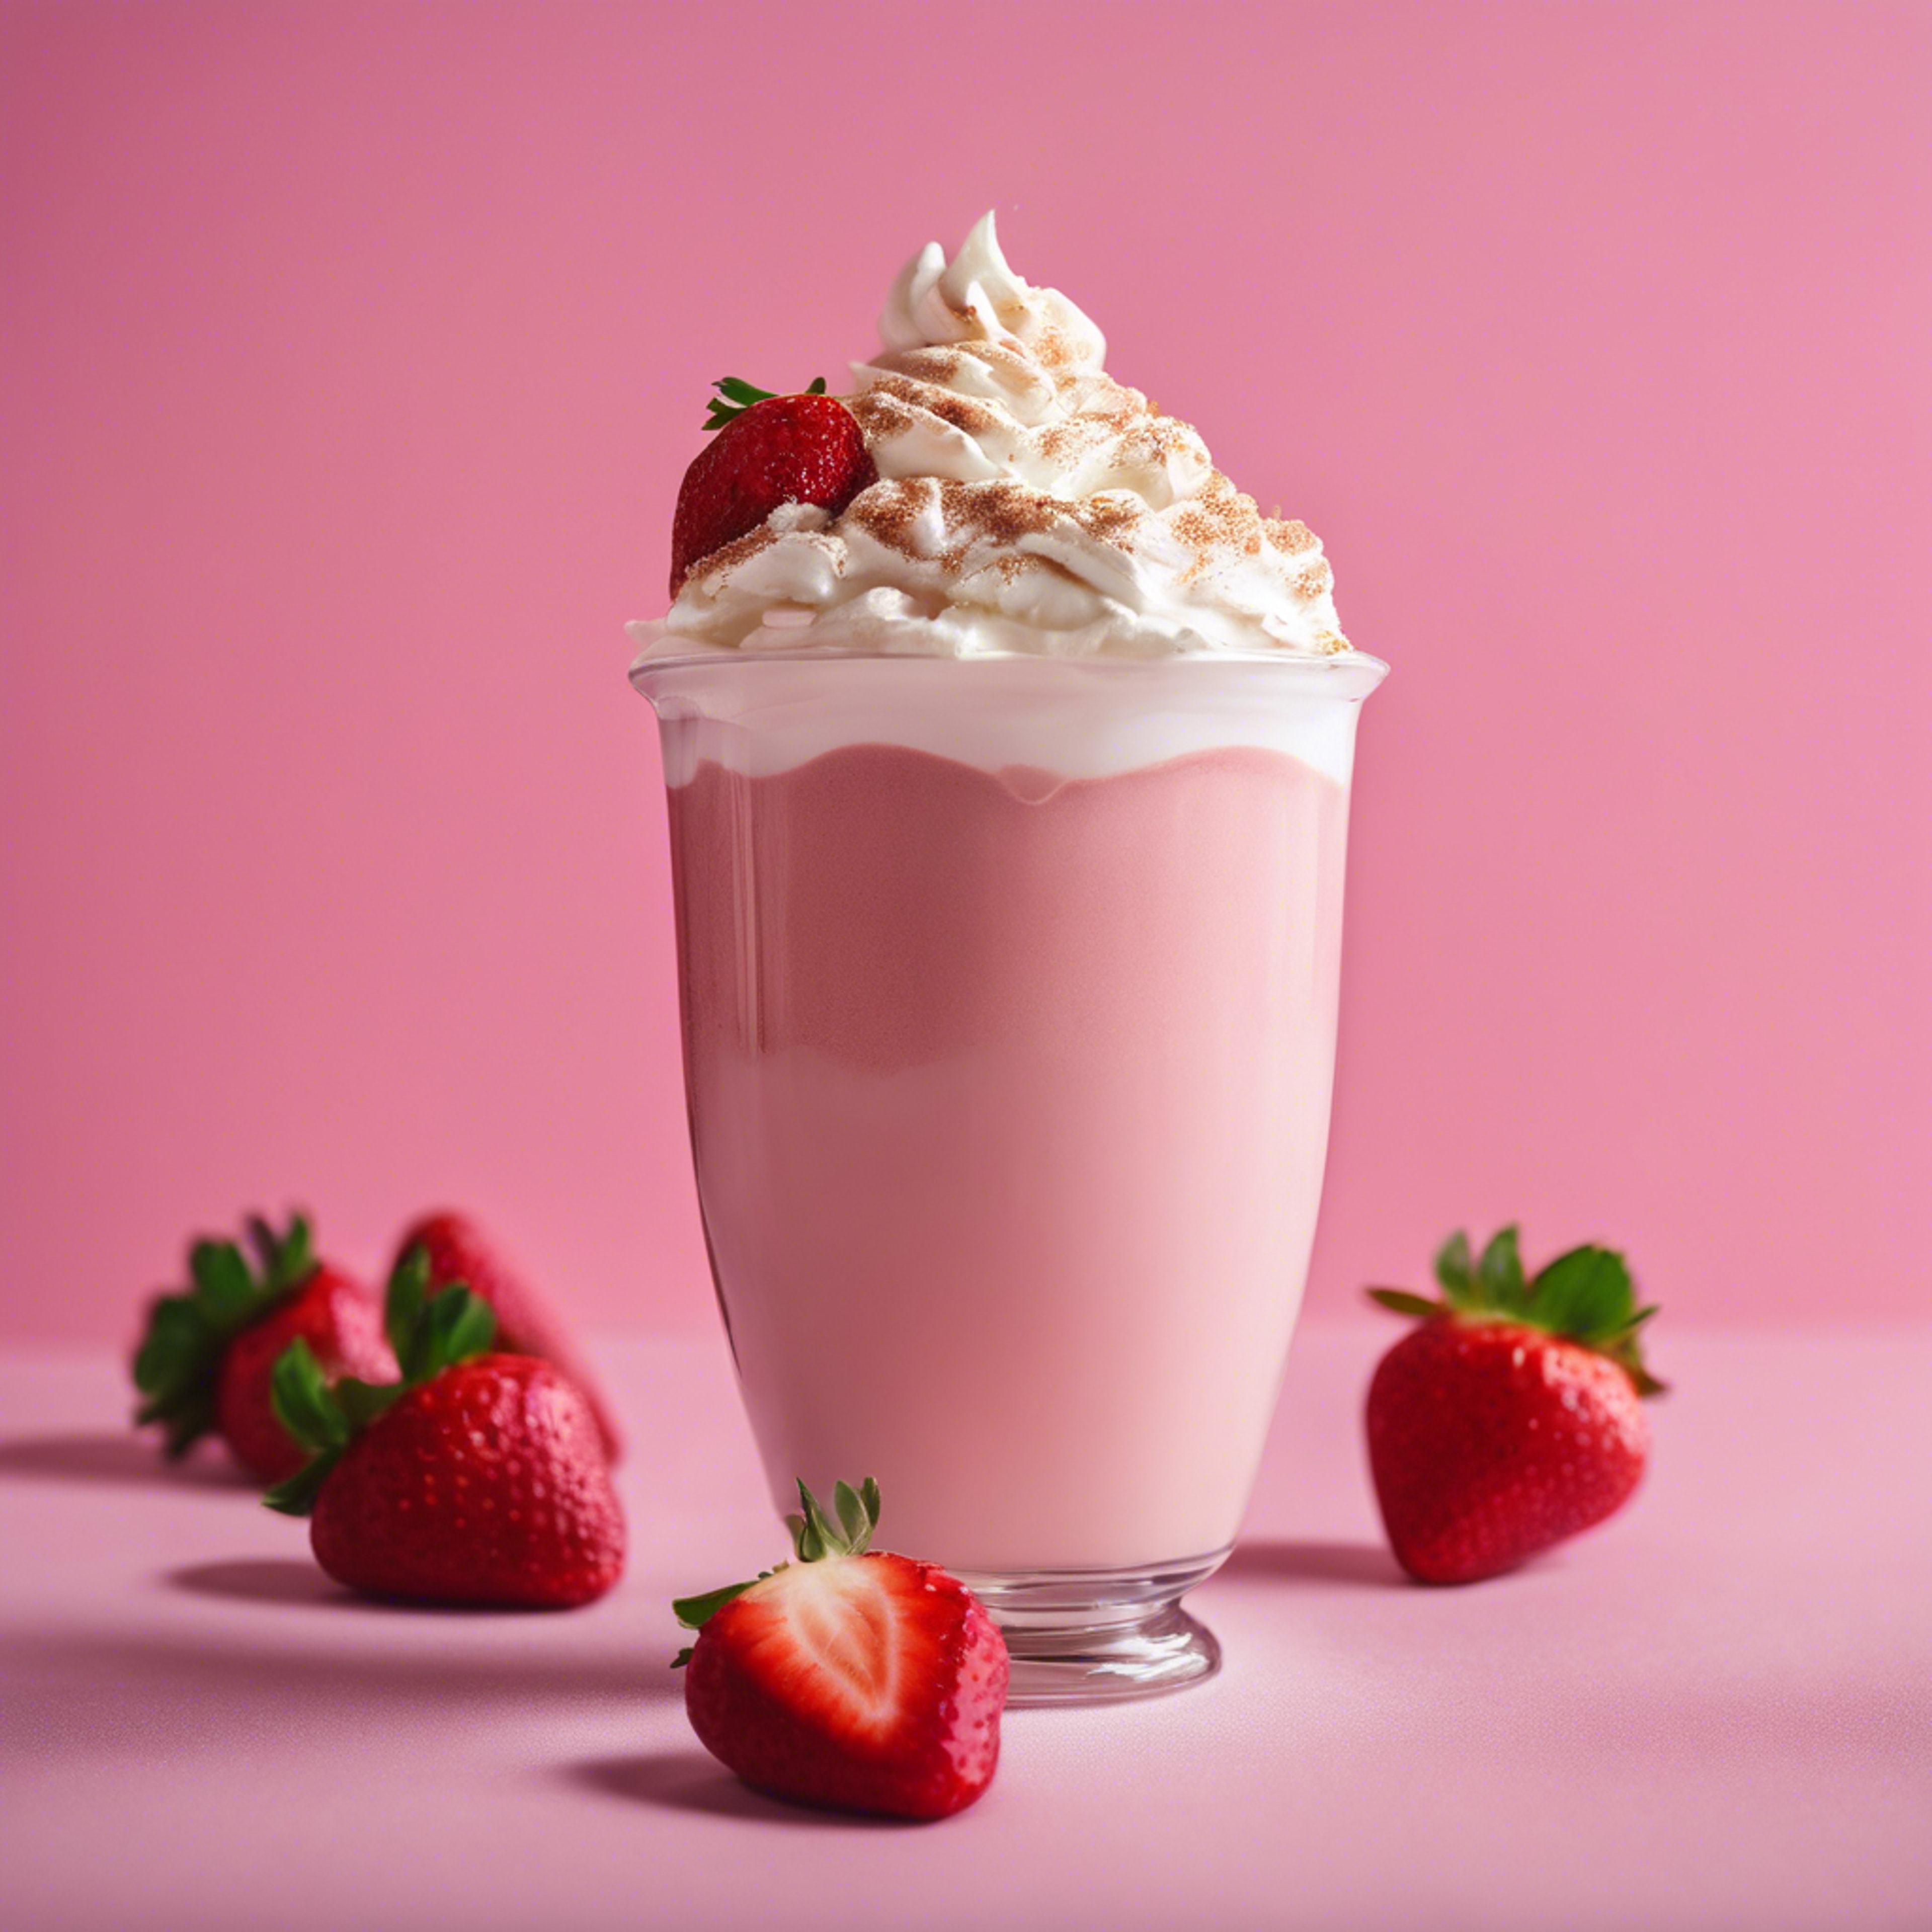 A freshly brewed strawberry latte with whipped cream against a pink backdrop. Тапет[f1420ed34c924526b0ea]